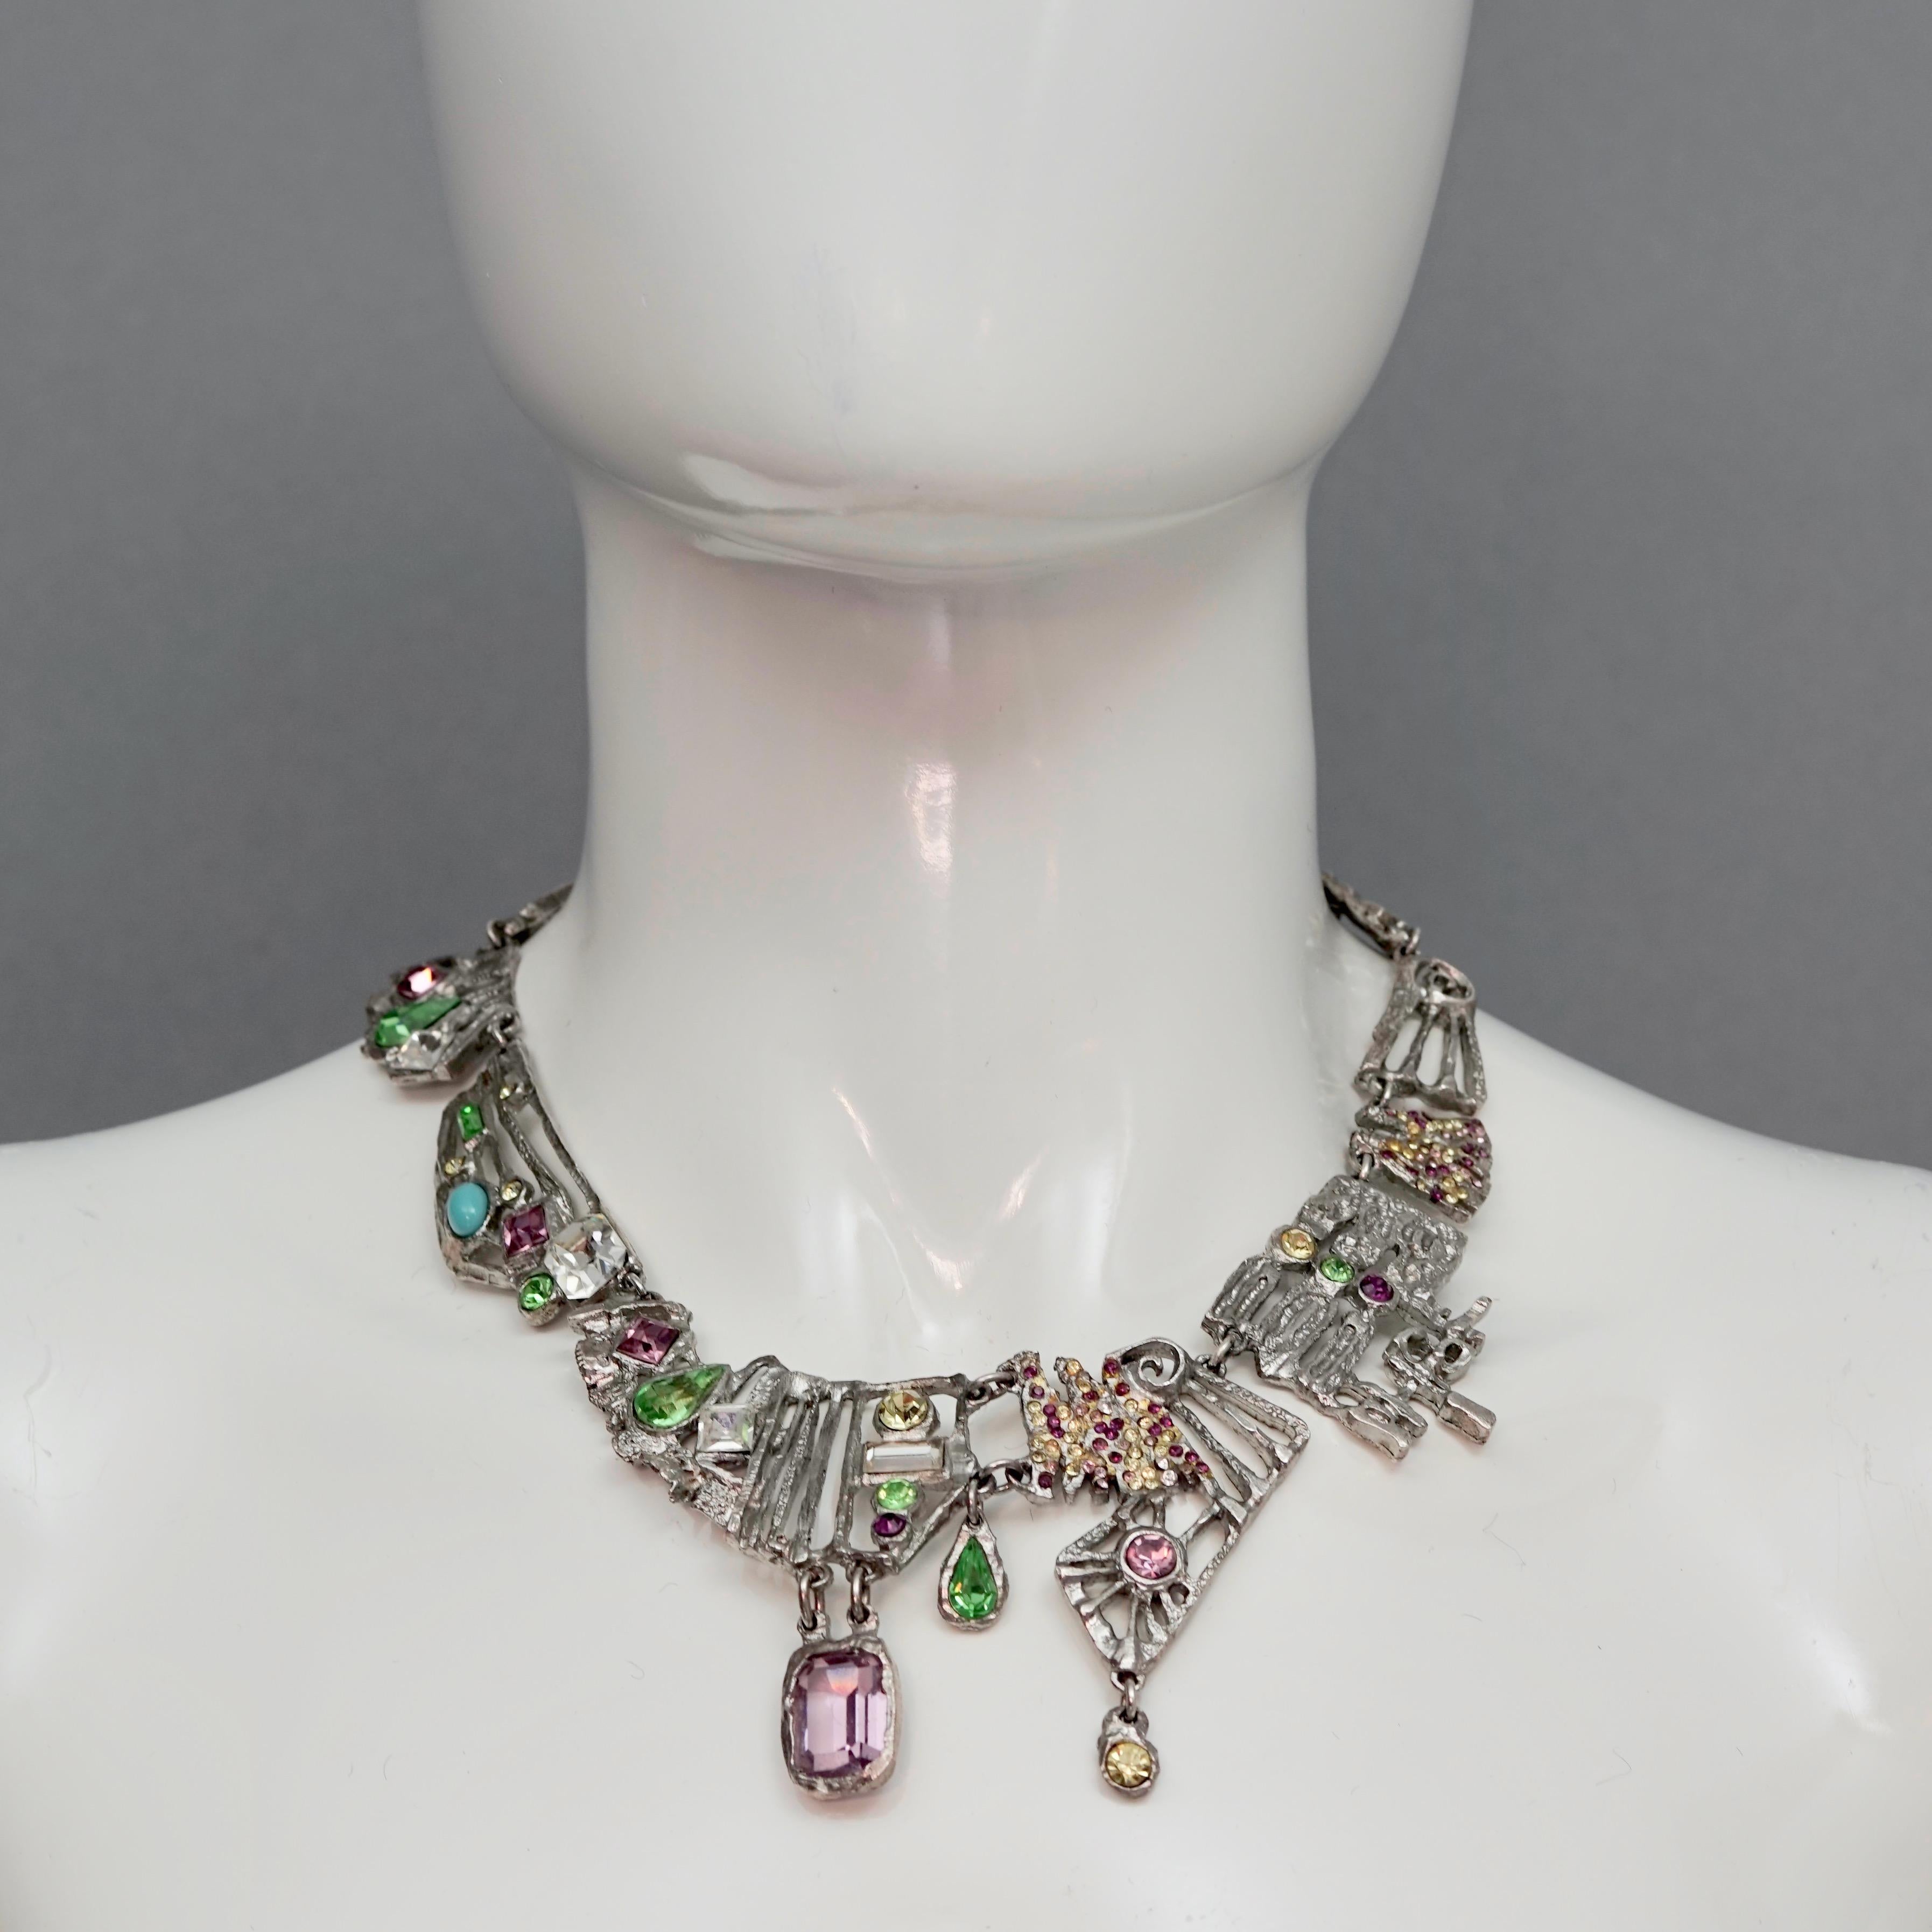 Vintage CHRISTIAN LACROIX Opulent Jewelled Openwork Necklace

Measurements:
Height: 2.36 inches (6 cm)
Wearable Length: 15.55 inches to 16.53 inches (39.5 cm to 42 cm) adjustable

Features:
- 100% Authentic CHRISTIAN LACROIX.
- Opulent openwork link